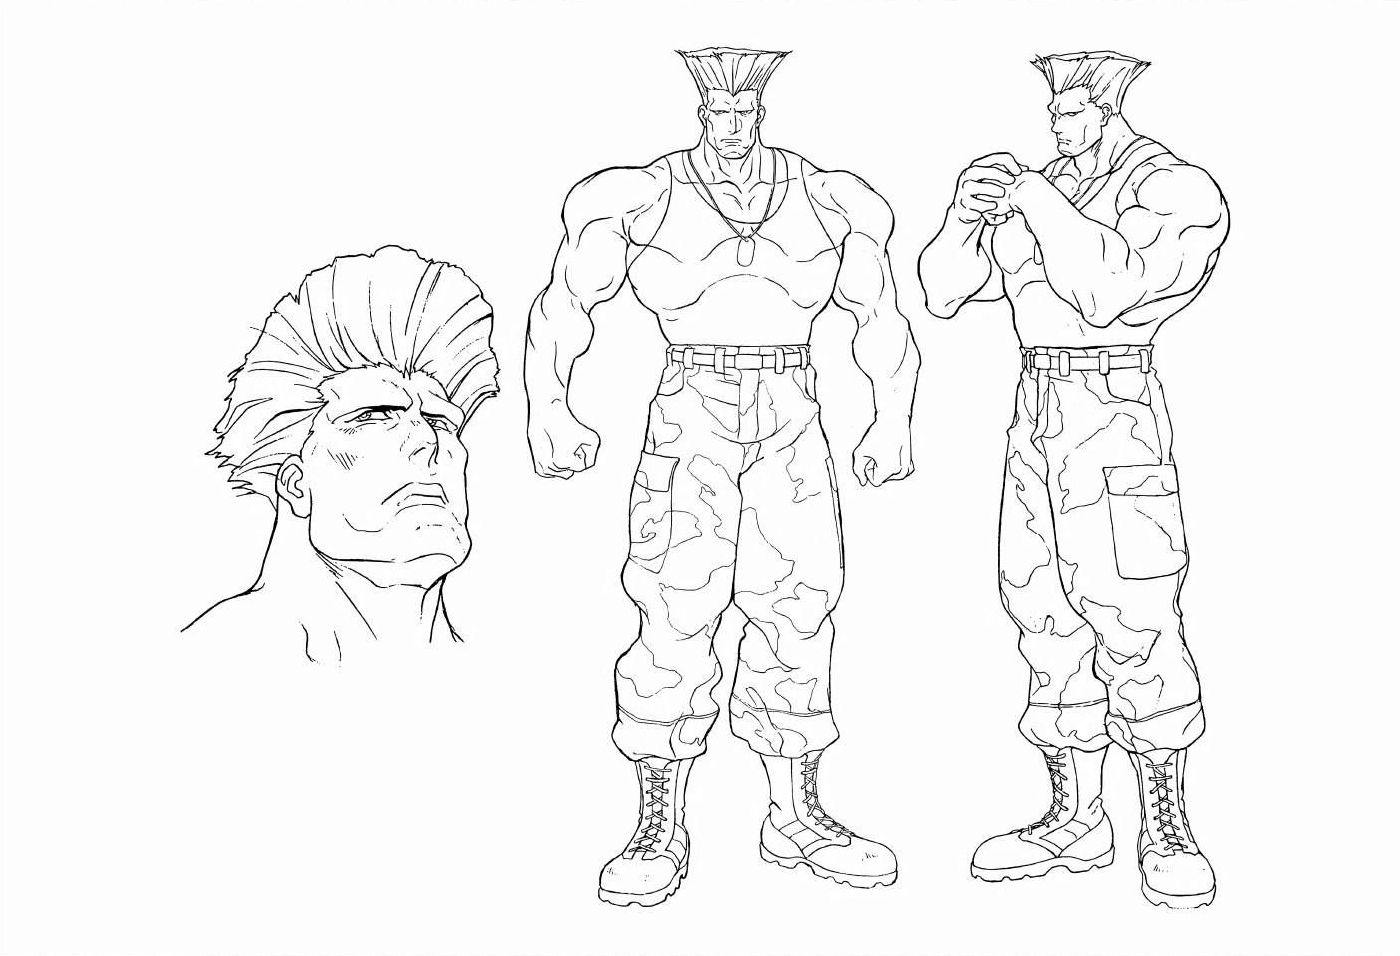 Street Fighter II Movie Guile Key Art by michaelxgamingph on